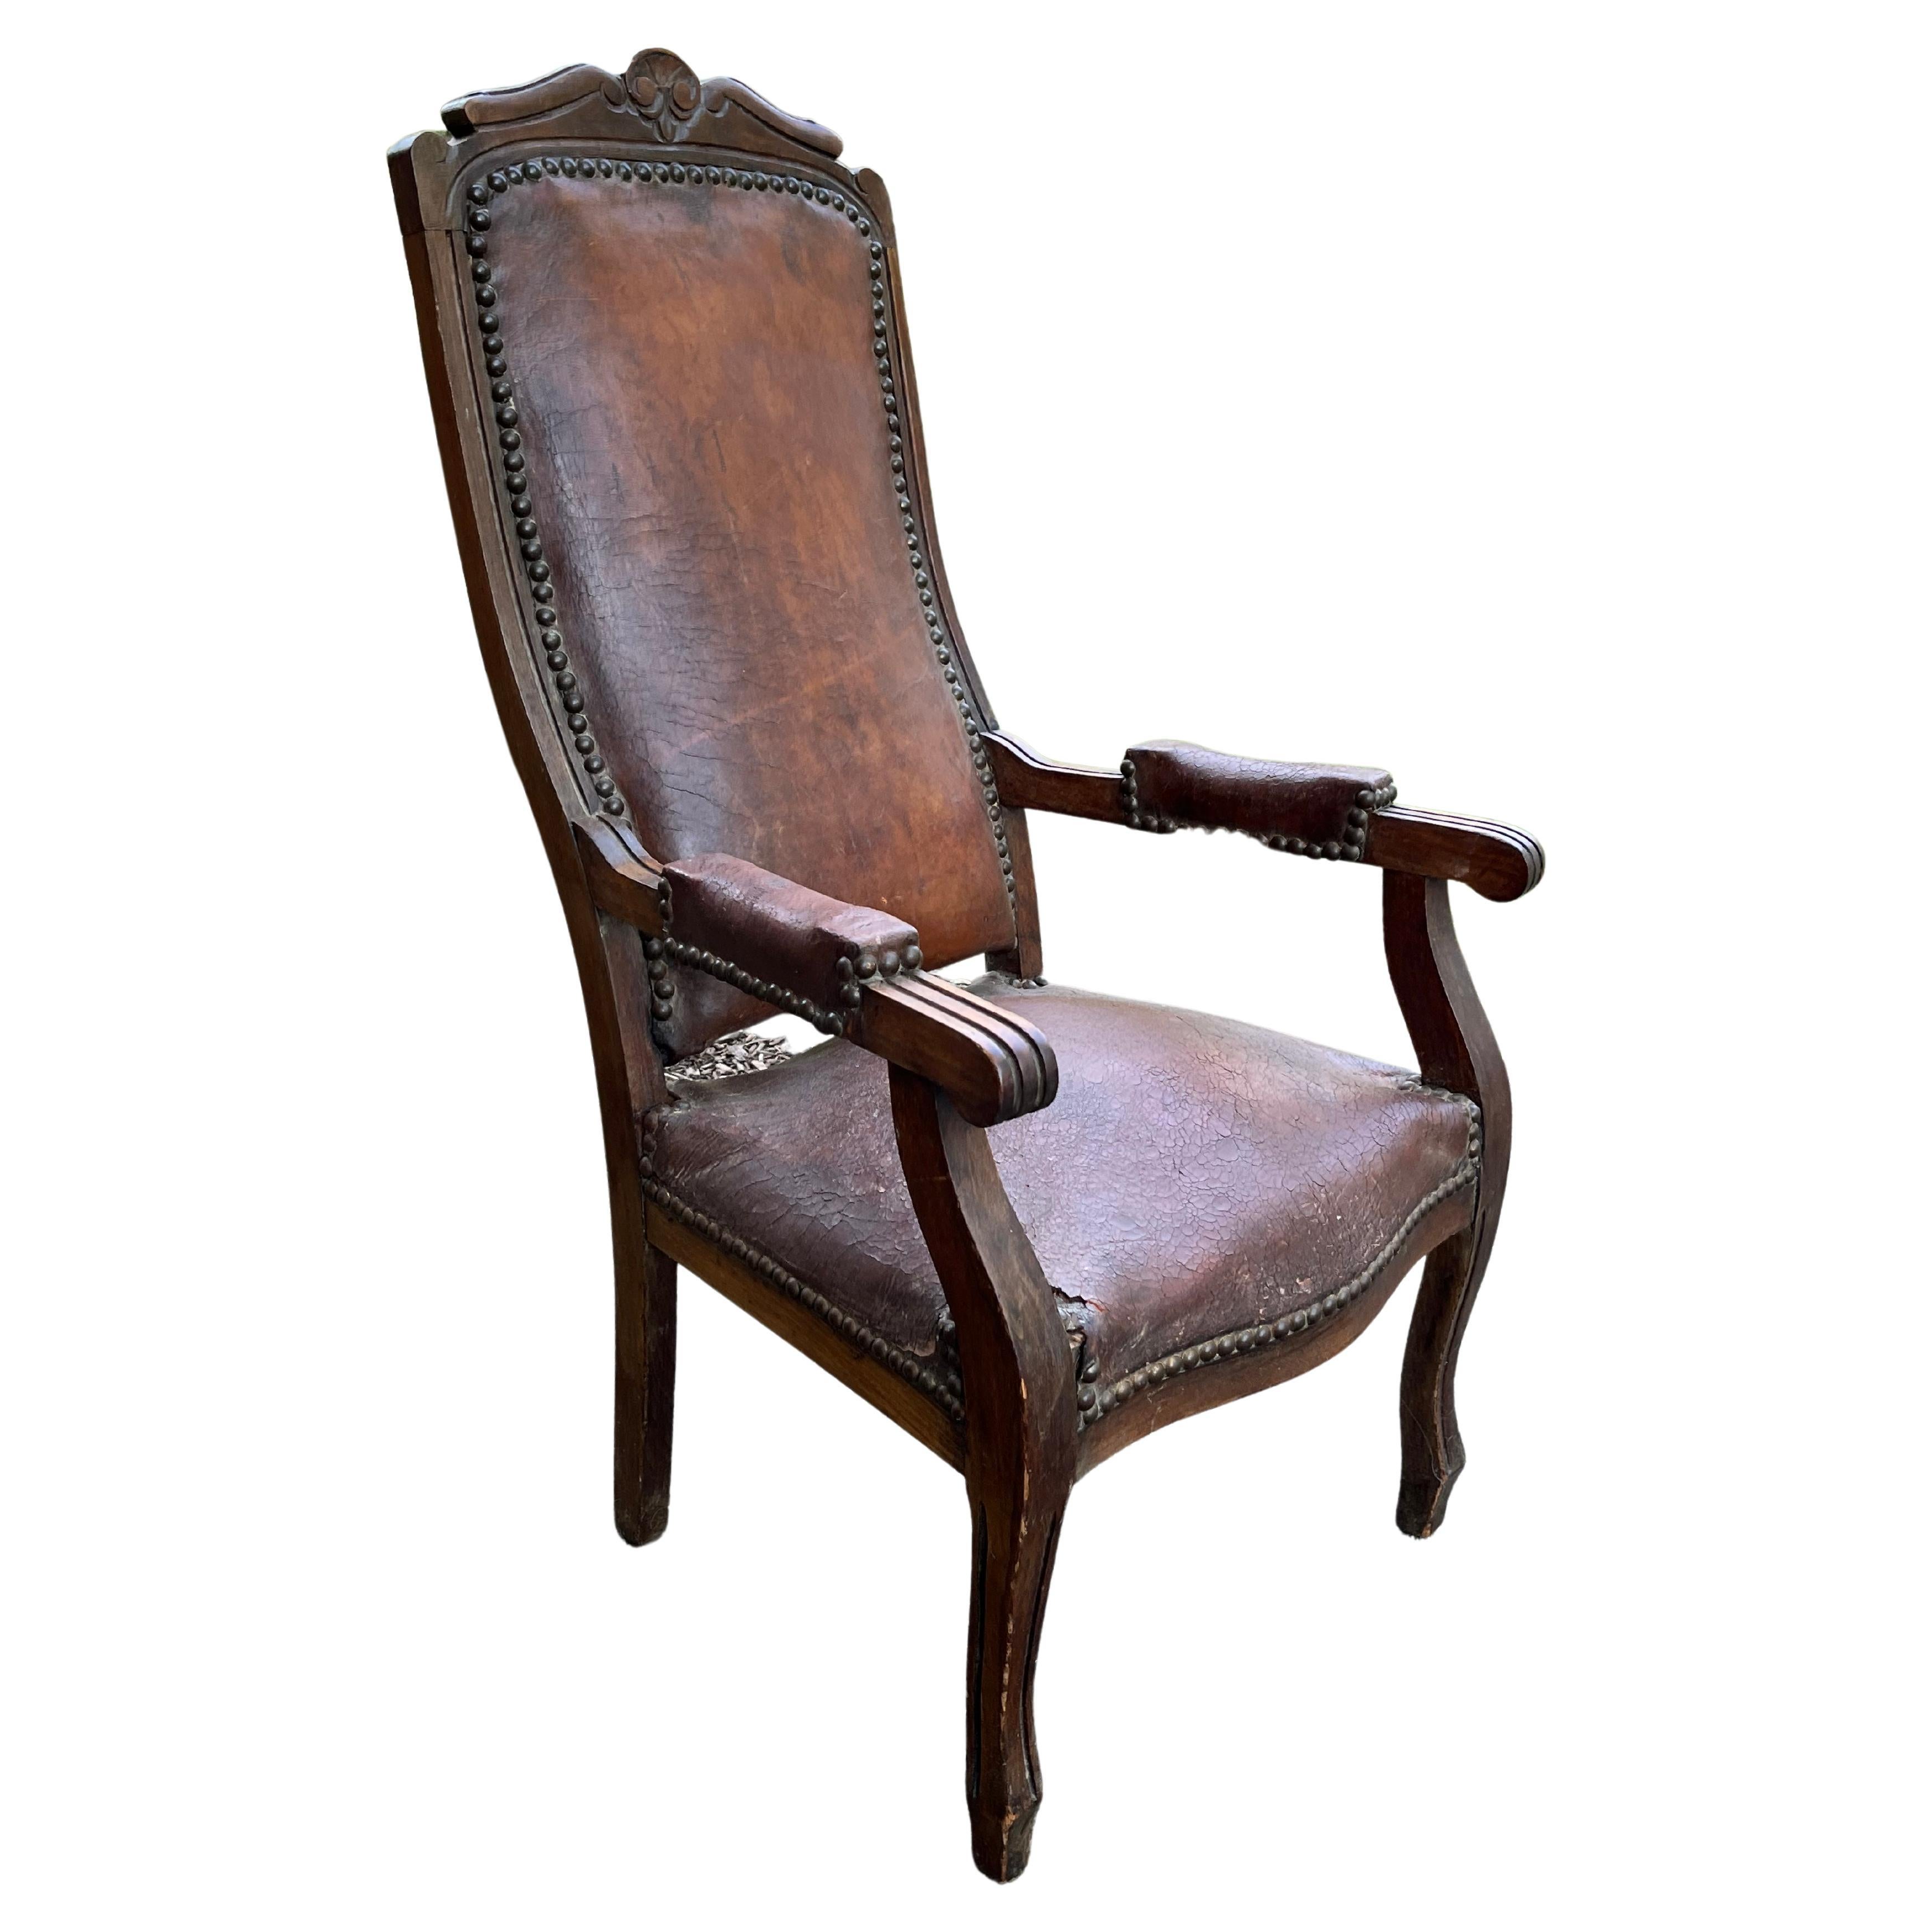 Child’s Size “Voltaire” Chair, 19th Century French